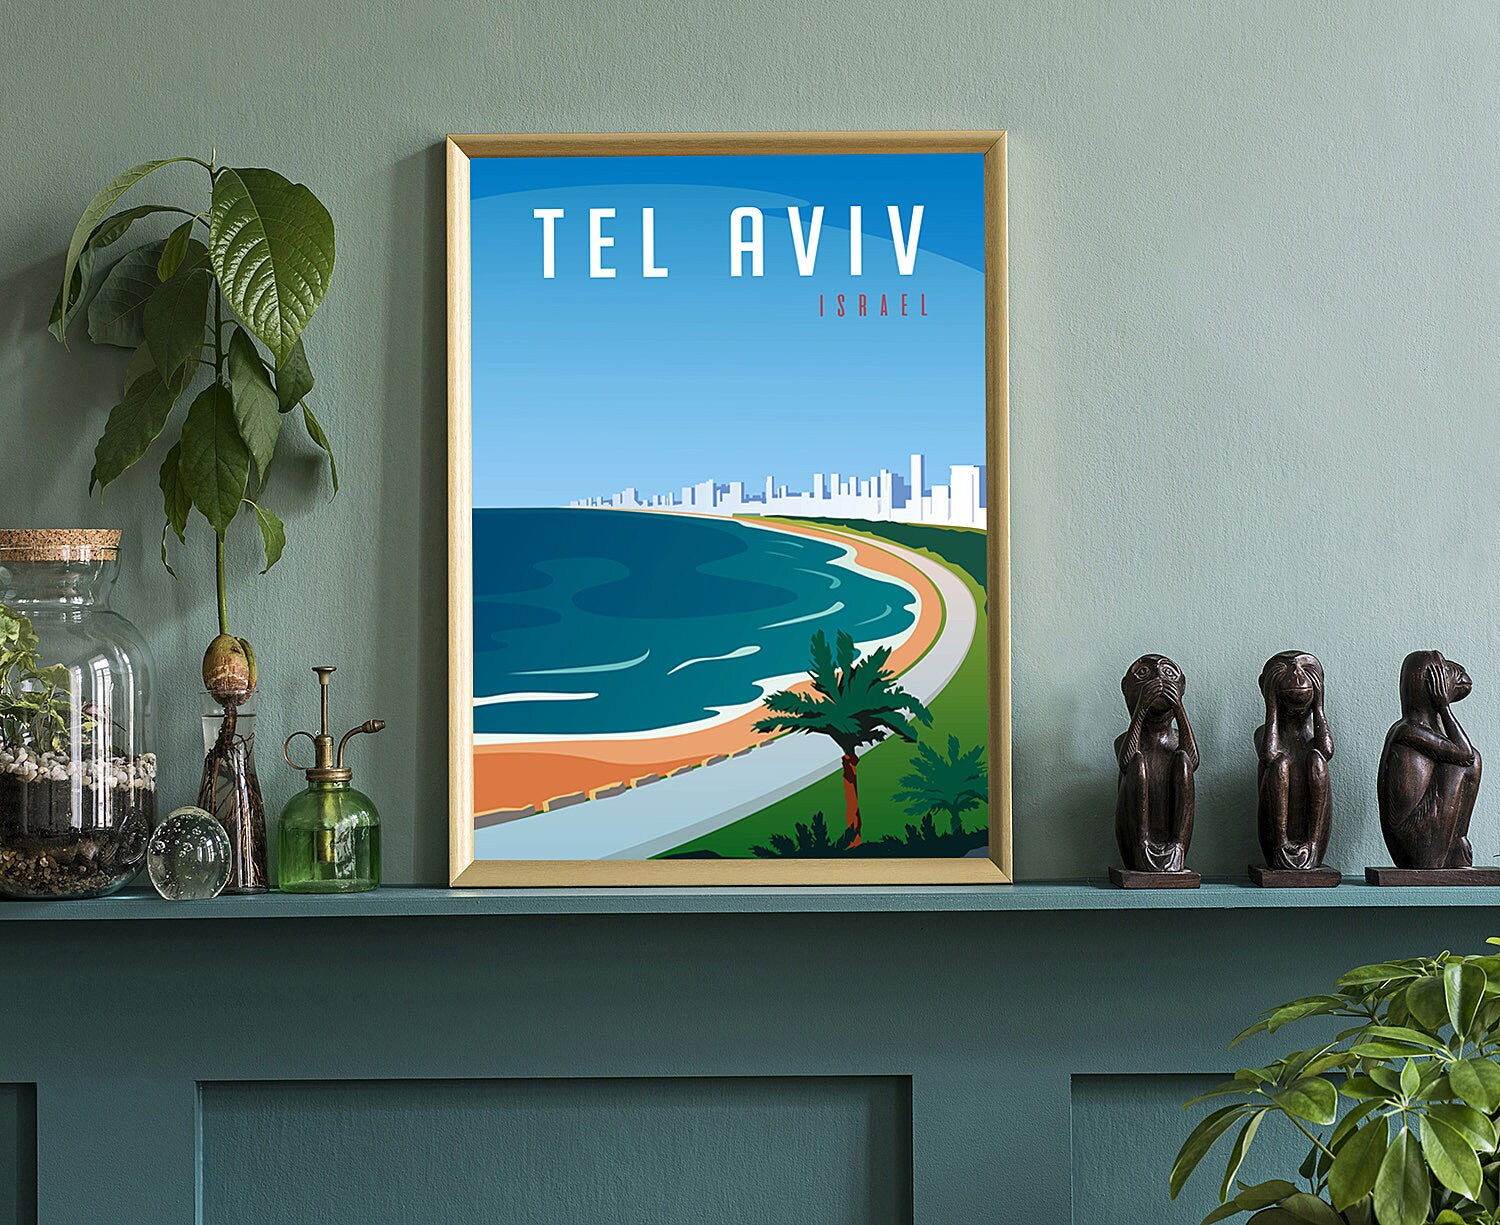 Retro Style Travel Poster, Israel - Tel Aviv,  Vintage Rustic Poster Print, Home Wall Art, Office Wall Decors, Israel, State Map Posters